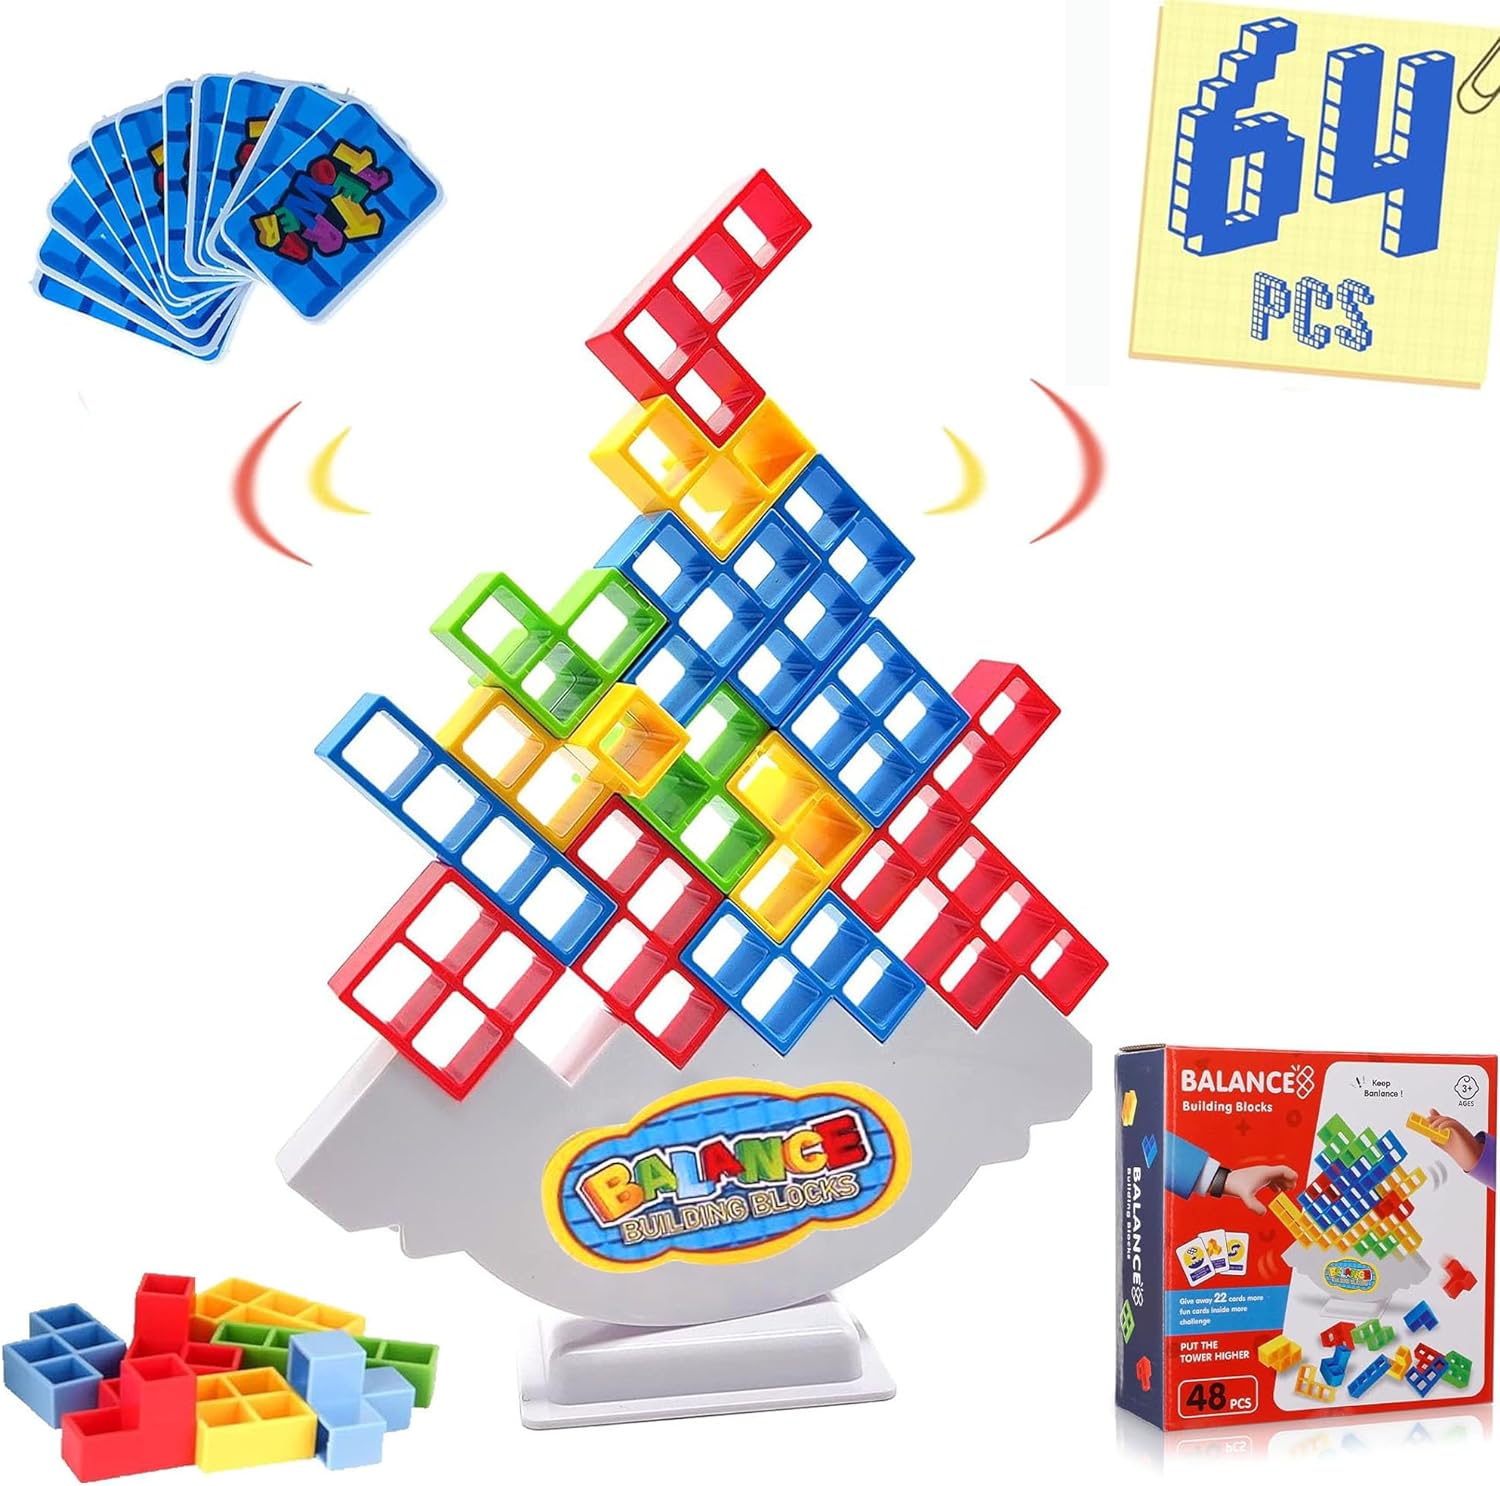 64 Pcs Tetra Tower Stacking Game, Balance Stacking Team Building Blocks Board Game for Kids & Adult, 2+ Players Family Games for Parties, Travel